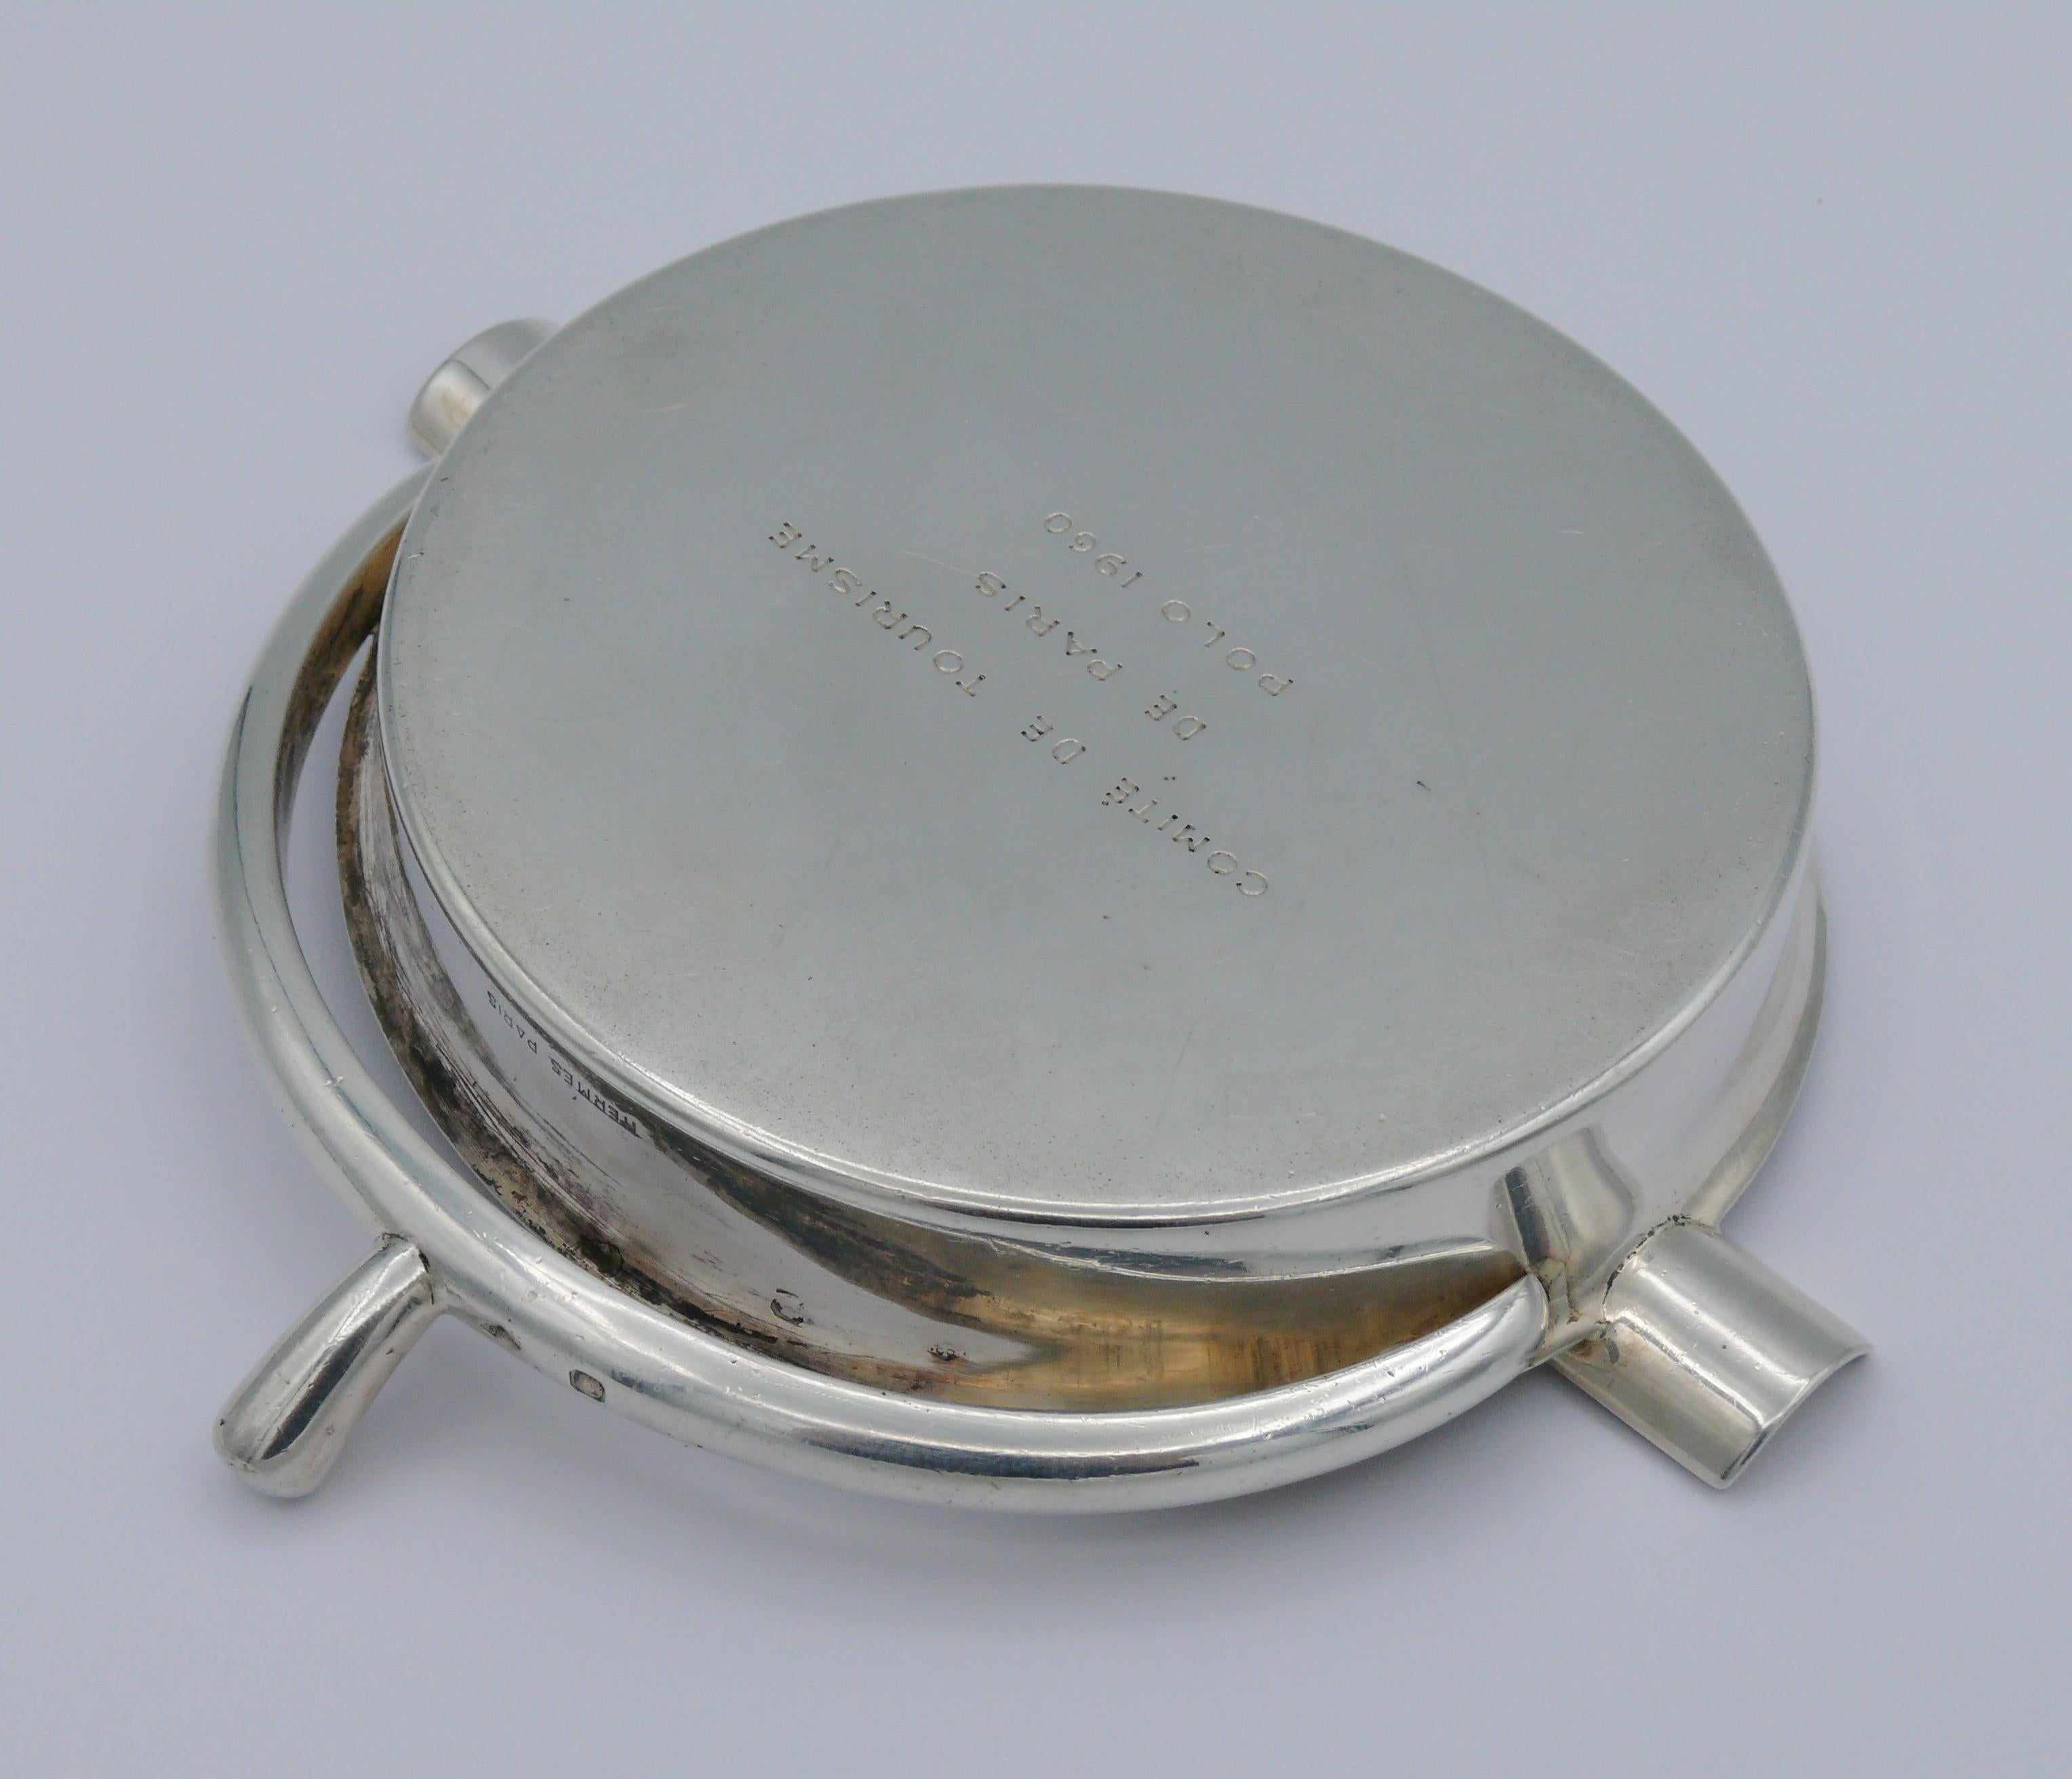 HERMES Vintage Solid Silver Guilloche Stirrup Ashtray For Sale 4